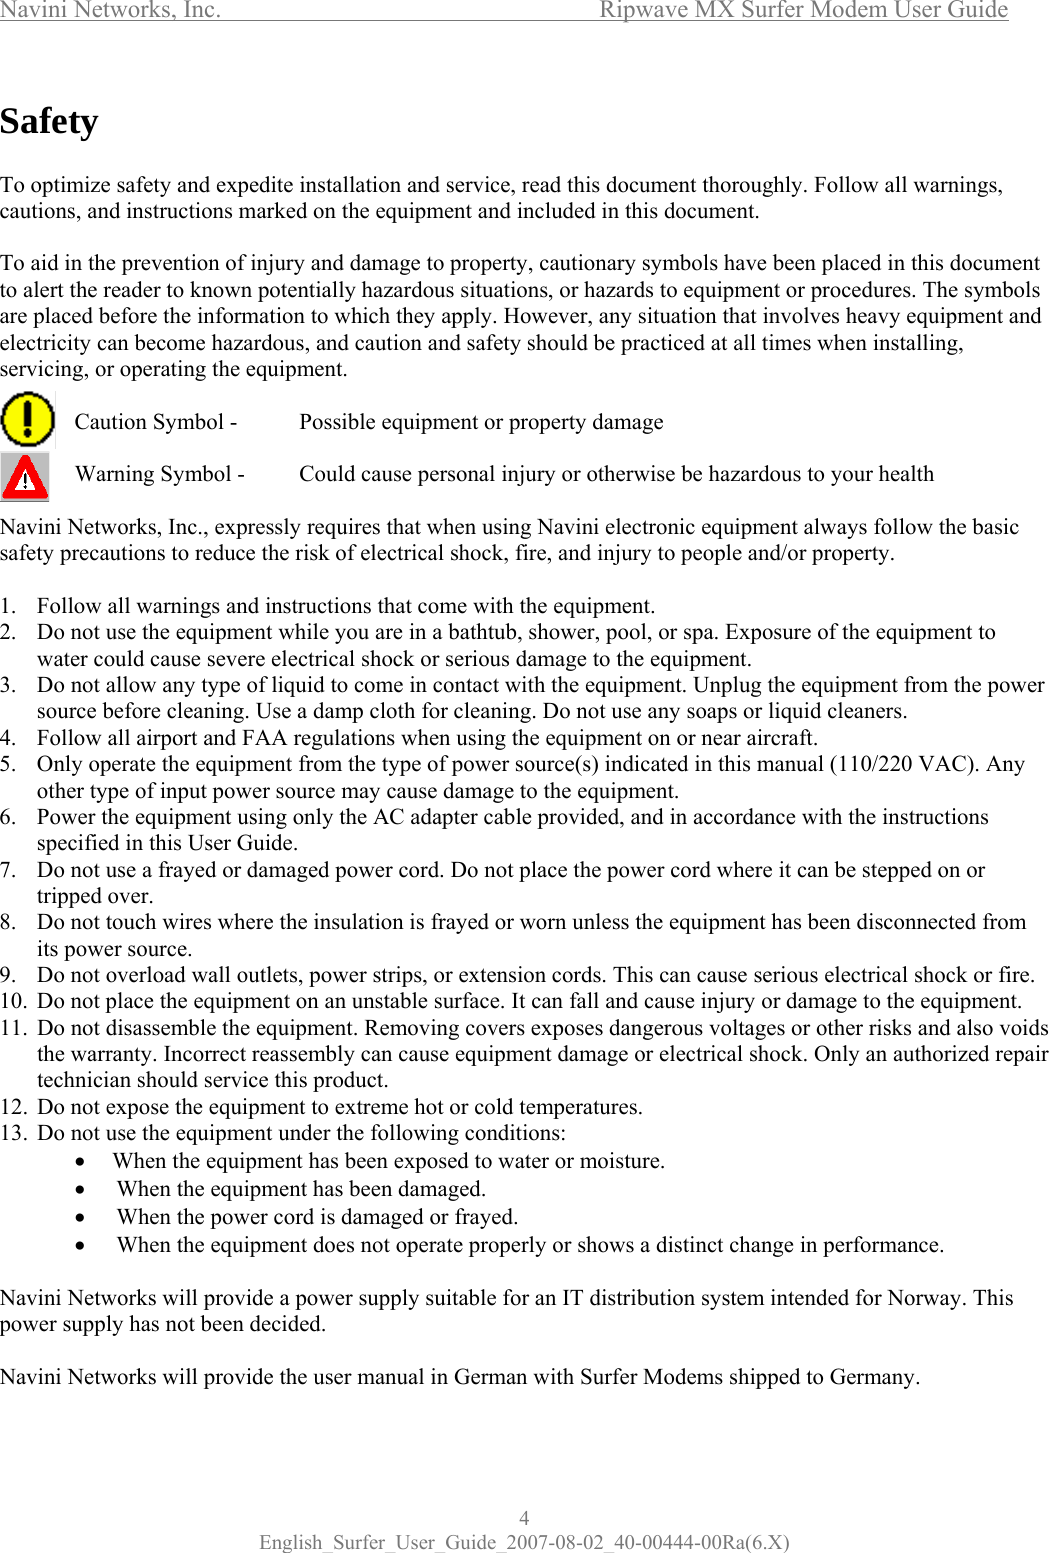 Navini Networks, Inc.      Ripwave MX Surfer Modem User Guide 4 English_Surfer_User_Guide_2007-08-02_40-00444-00Ra(6.X) Safety  To optimize safety and expedite installation and service, read this document thoroughly. Follow all warnings, cautions, and instructions marked on the equipment and included in this document.  To aid in the prevention of injury and damage to property, cautionary symbols have been placed in this document to alert the reader to known potentially hazardous situations, or hazards to equipment or procedures. The symbols are placed before the information to which they apply. However, any situation that involves heavy equipment and electricity can become hazardous, and caution and safety should be practiced at all times when installing, servicing, or operating the equipment.    Caution Symbol -   Possible equipment or property damage    Warning Symbol -   Could cause personal injury or otherwise be hazardous to your health  Navini Networks, Inc., expressly requires that when using Navini electronic equipment always follow the basic safety precautions to reduce the risk of electrical shock, fire, and injury to people and/or property.  1. Follow all warnings and instructions that come with the equipment. 2. Do not use the equipment while you are in a bathtub, shower, pool, or spa. Exposure of the equipment to water could cause severe electrical shock or serious damage to the equipment. 3. Do not allow any type of liquid to come in contact with the equipment. Unplug the equipment from the power source before cleaning. Use a damp cloth for cleaning. Do not use any soaps or liquid cleaners. 4. Follow all airport and FAA regulations when using the equipment on or near aircraft. 5. Only operate the equipment from the type of power source(s) indicated in this manual (110/220 VAC). Any other type of input power source may cause damage to the equipment. 6. Power the equipment using only the AC adapter cable provided, and in accordance with the instructions specified in this User Guide. 7. Do not use a frayed or damaged power cord. Do not place the power cord where it can be stepped on or tripped over. 8. Do not touch wires where the insulation is frayed or worn unless the equipment has been disconnected from its power source. 9. Do not overload wall outlets, power strips, or extension cords. This can cause serious electrical shock or fire.  10. Do not place the equipment on an unstable surface. It can fall and cause injury or damage to the equipment. 11. Do not disassemble the equipment. Removing covers exposes dangerous voltages or other risks and also voids the warranty. Incorrect reassembly can cause equipment damage or electrical shock. Only an authorized repair technician should service this product.  12. Do not expose the equipment to extreme hot or cold temperatures. 13. Do not use the equipment under the following conditions: •  When the equipment has been exposed to water or moisture. •   When the equipment has been damaged. •  When the power cord is damaged or frayed. •  When the equipment does not operate properly or shows a distinct change in performance.  Navini Networks will provide a power supply suitable for an IT distribution system intended for Norway. This power supply has not been decided.   Navini Networks will provide the user manual in German with Surfer Modems shipped to Germany. 